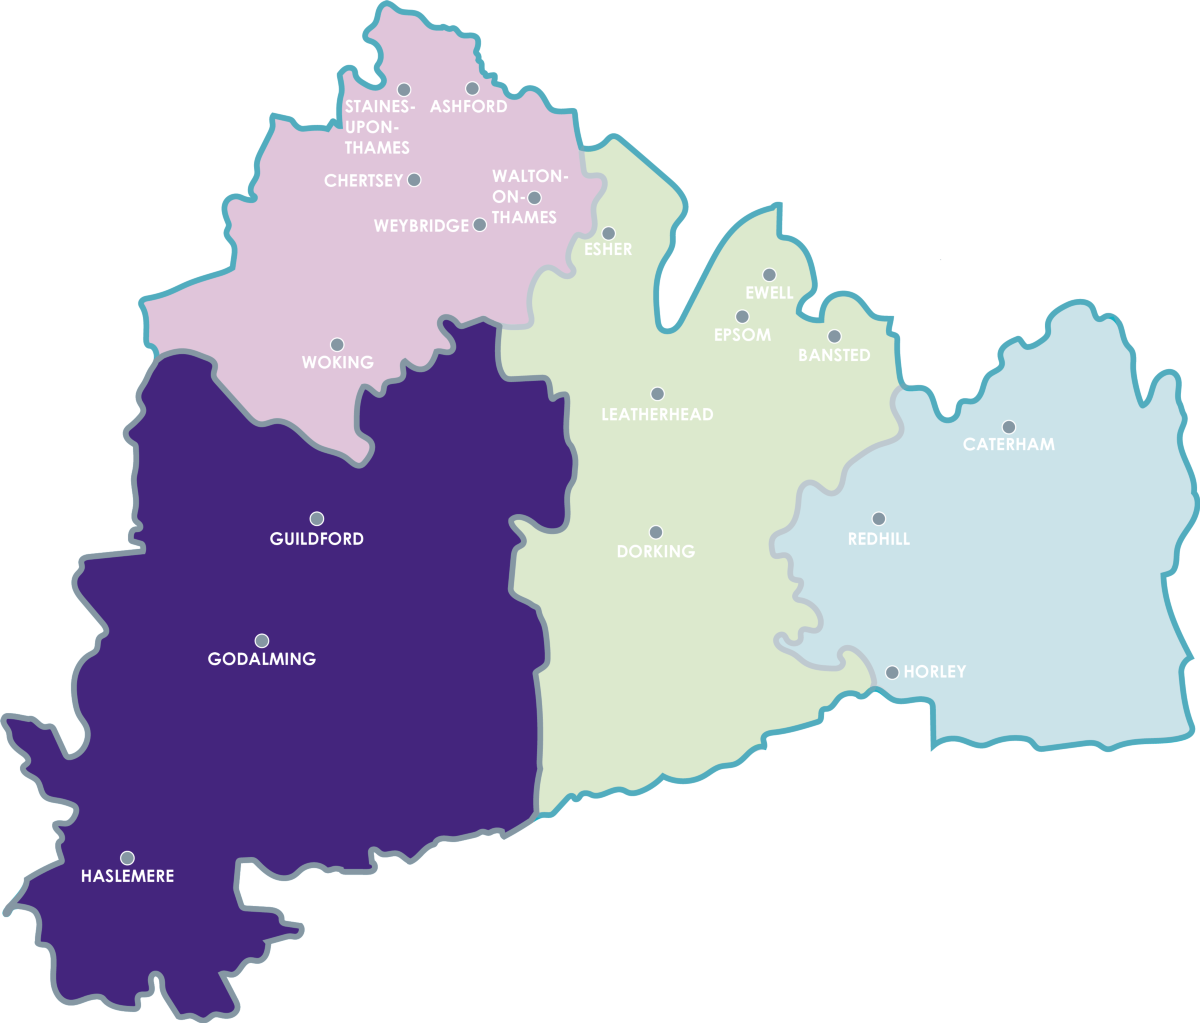 image-GW_Fill_Purple_Surrey_Heartlands_Places_Faded_with_Towns.png